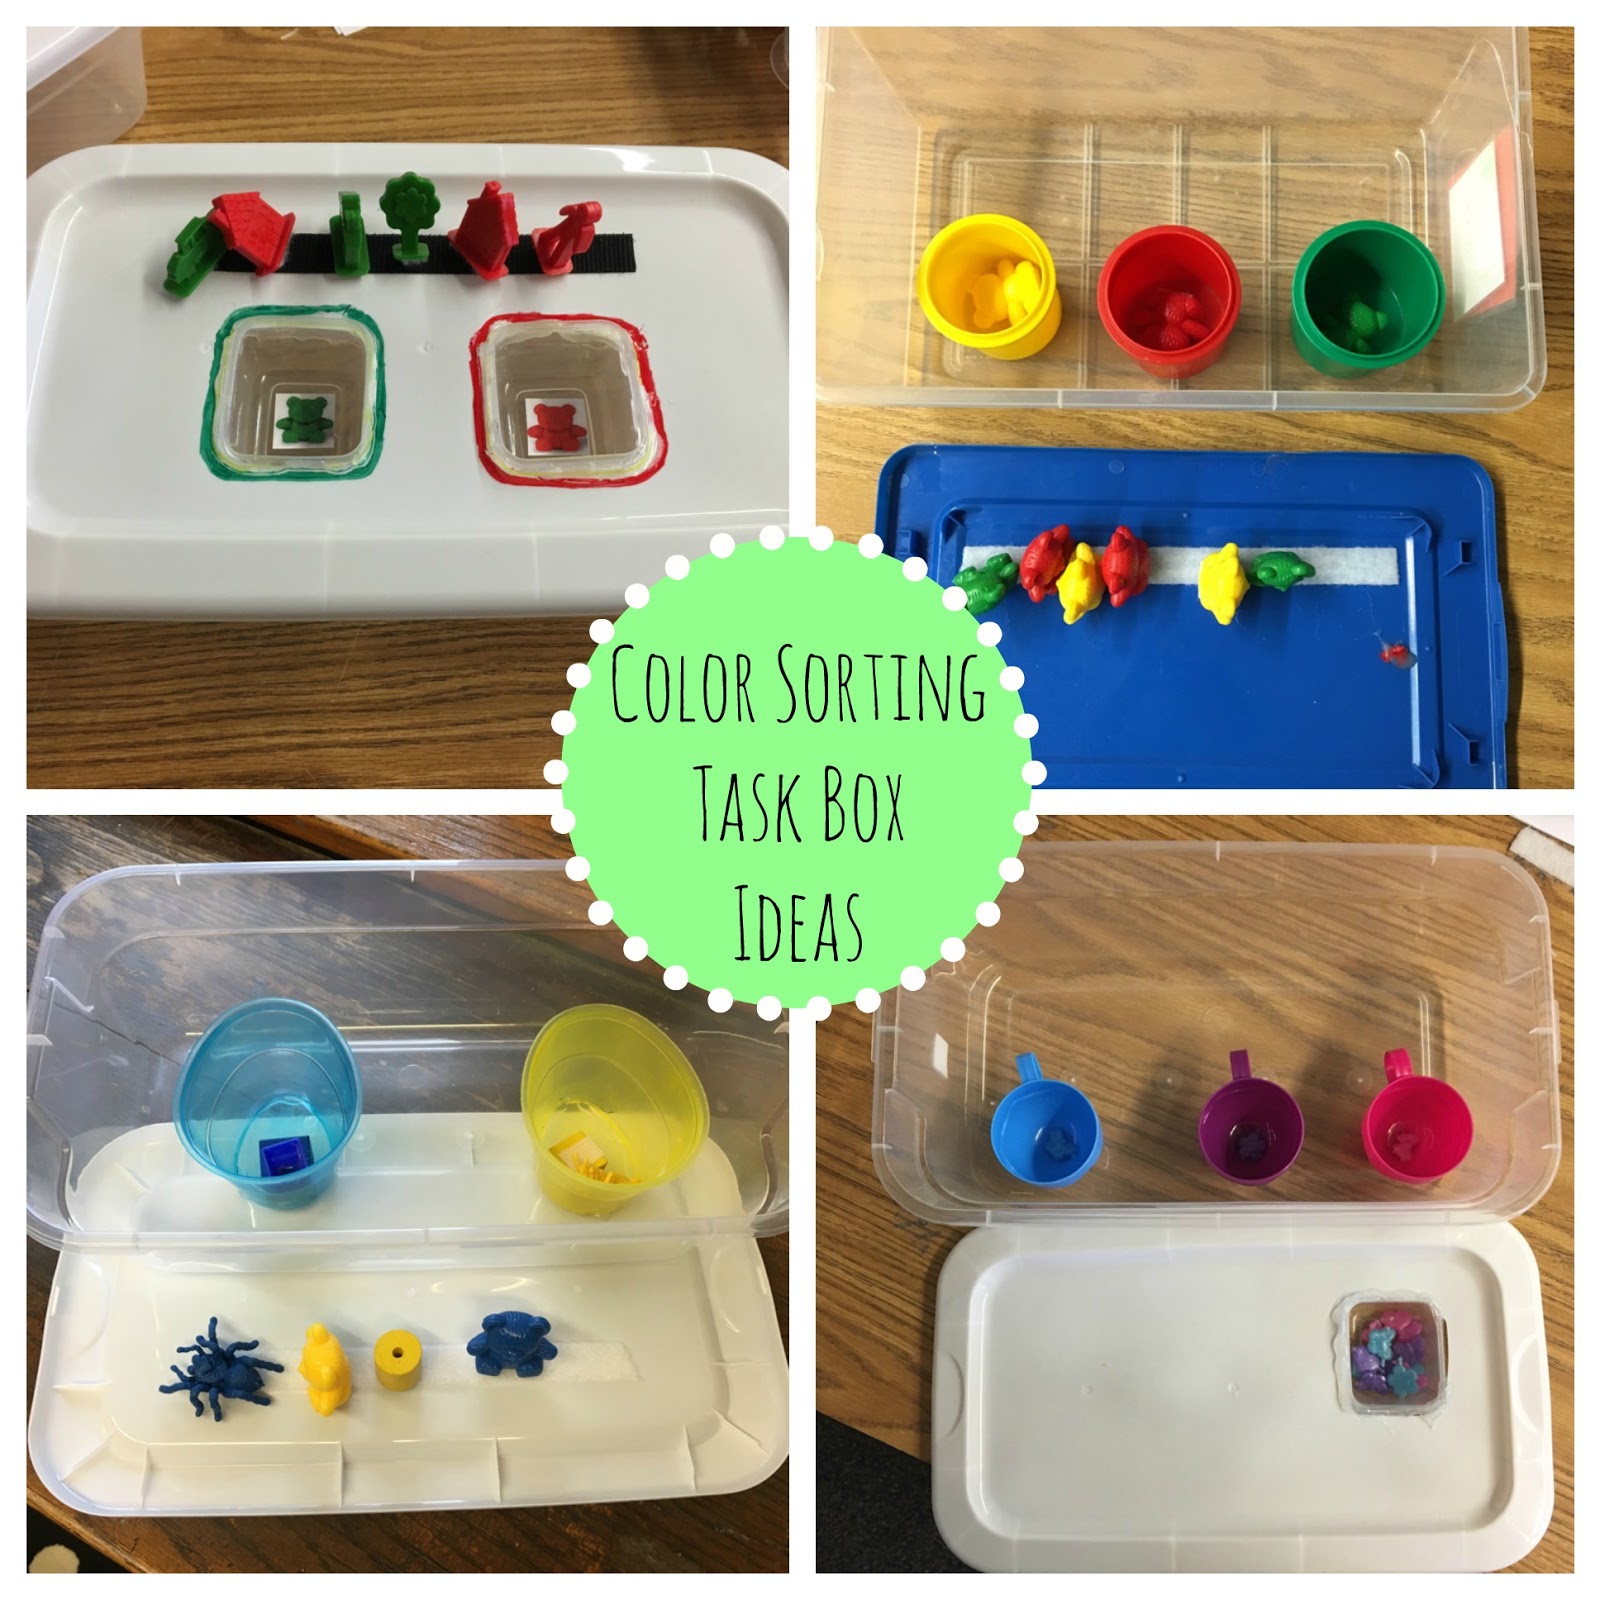 Little Miss Kim's Class: Simple Task Box Ideas for Special Education